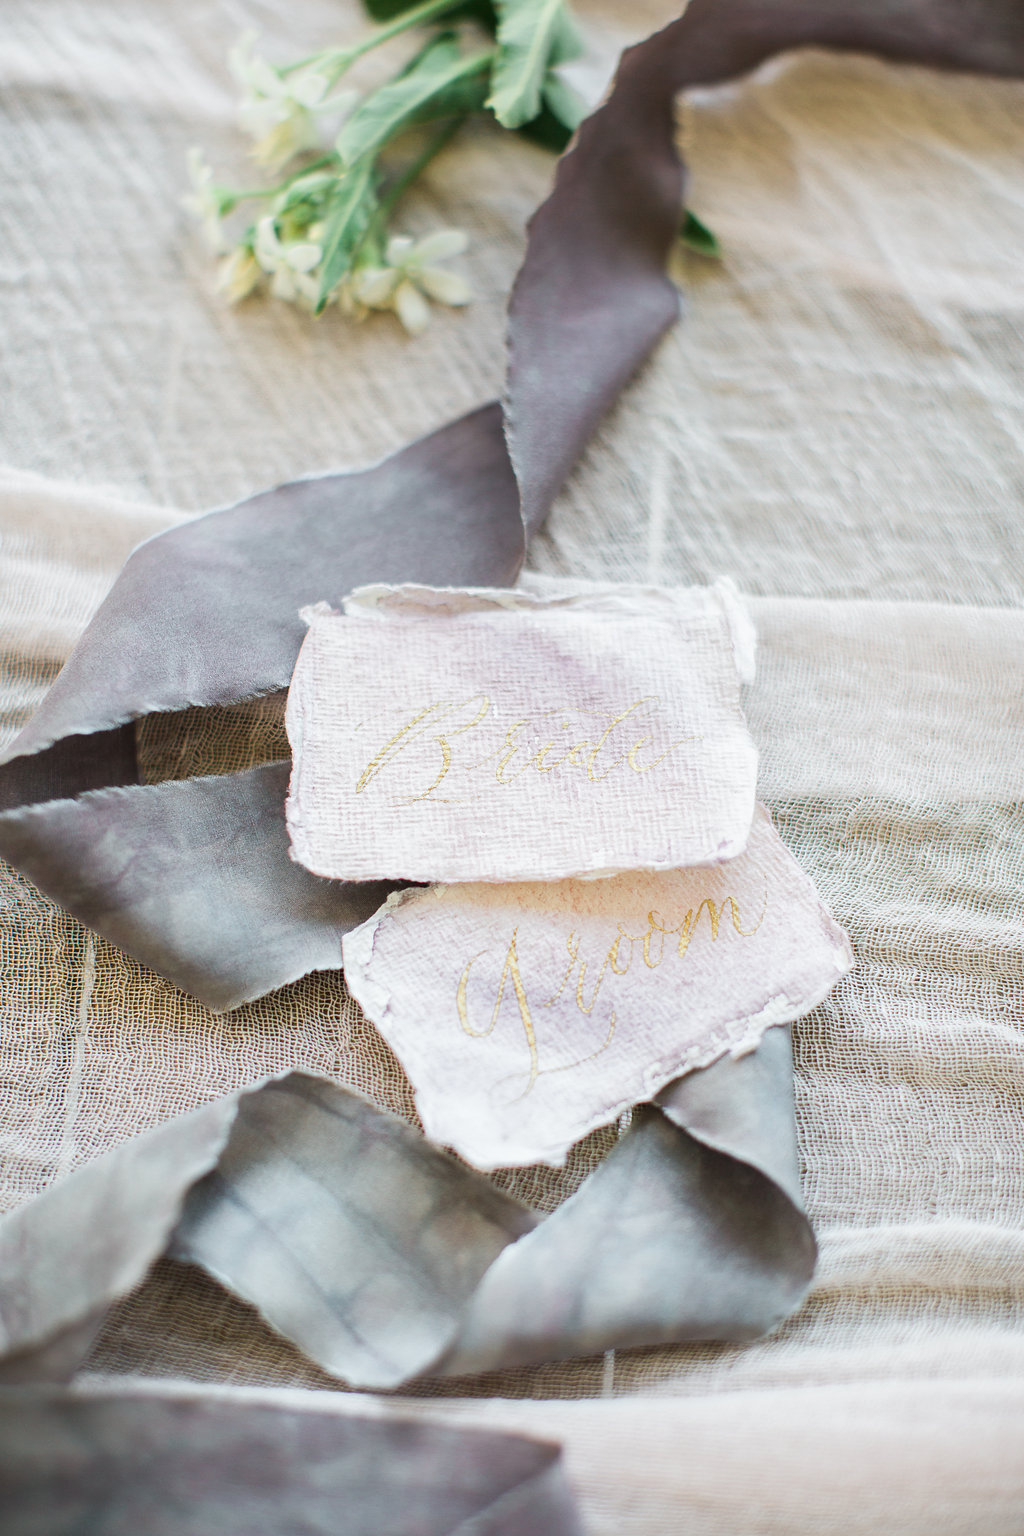 FrouFrou Chic Ribbon | The Day's Design | Ashley Slater Photography